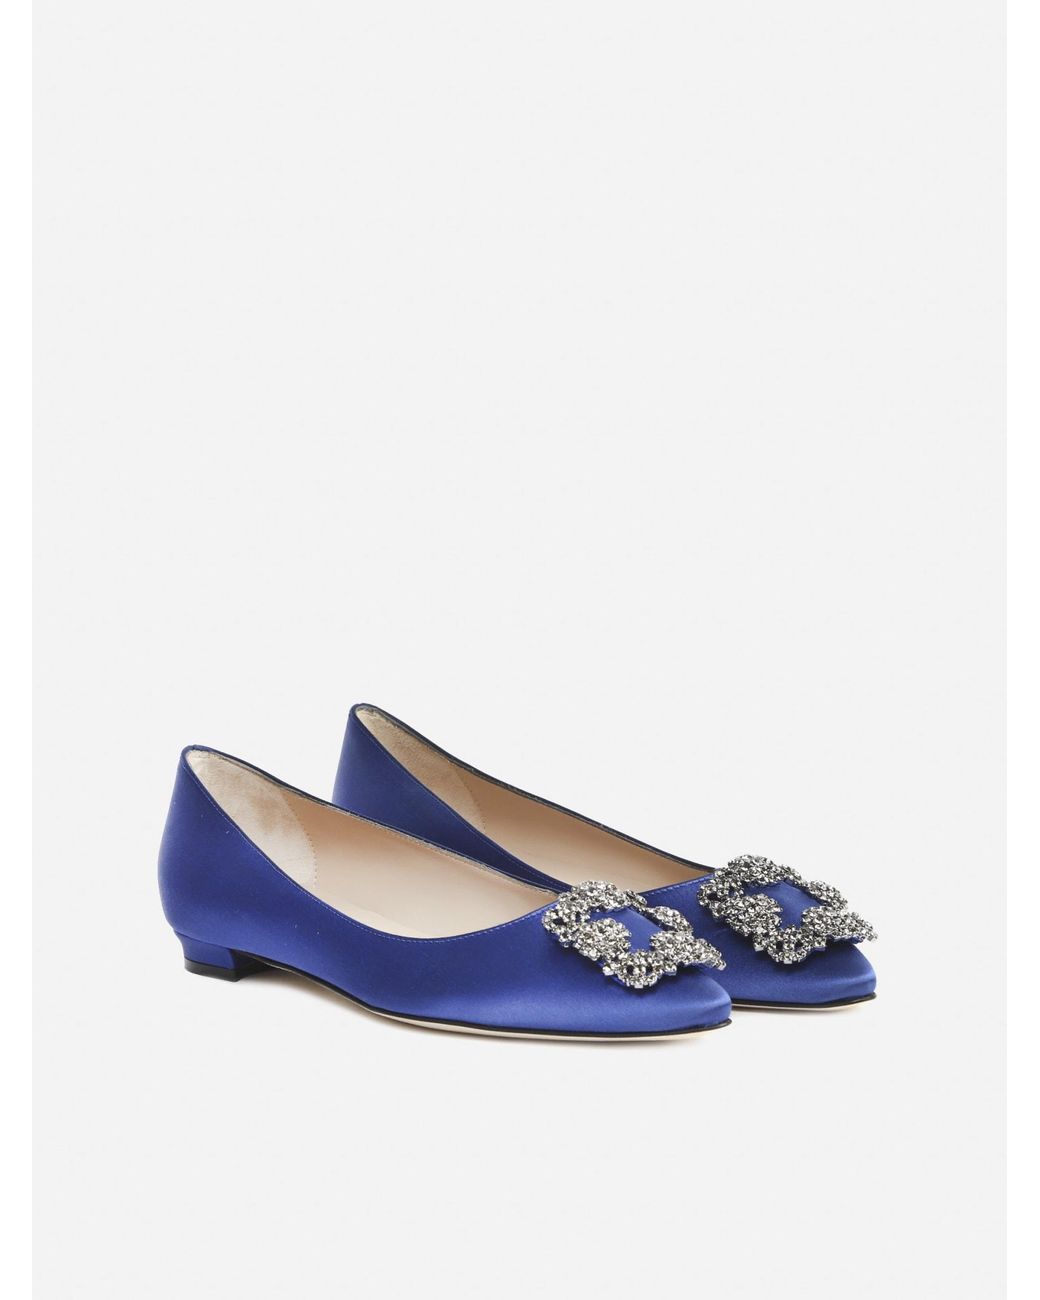 Womens Shoes Flats and flat shoes Ballet flats and ballerina shoes Manolo Blahnik Blue Satin Hangisi Flats 